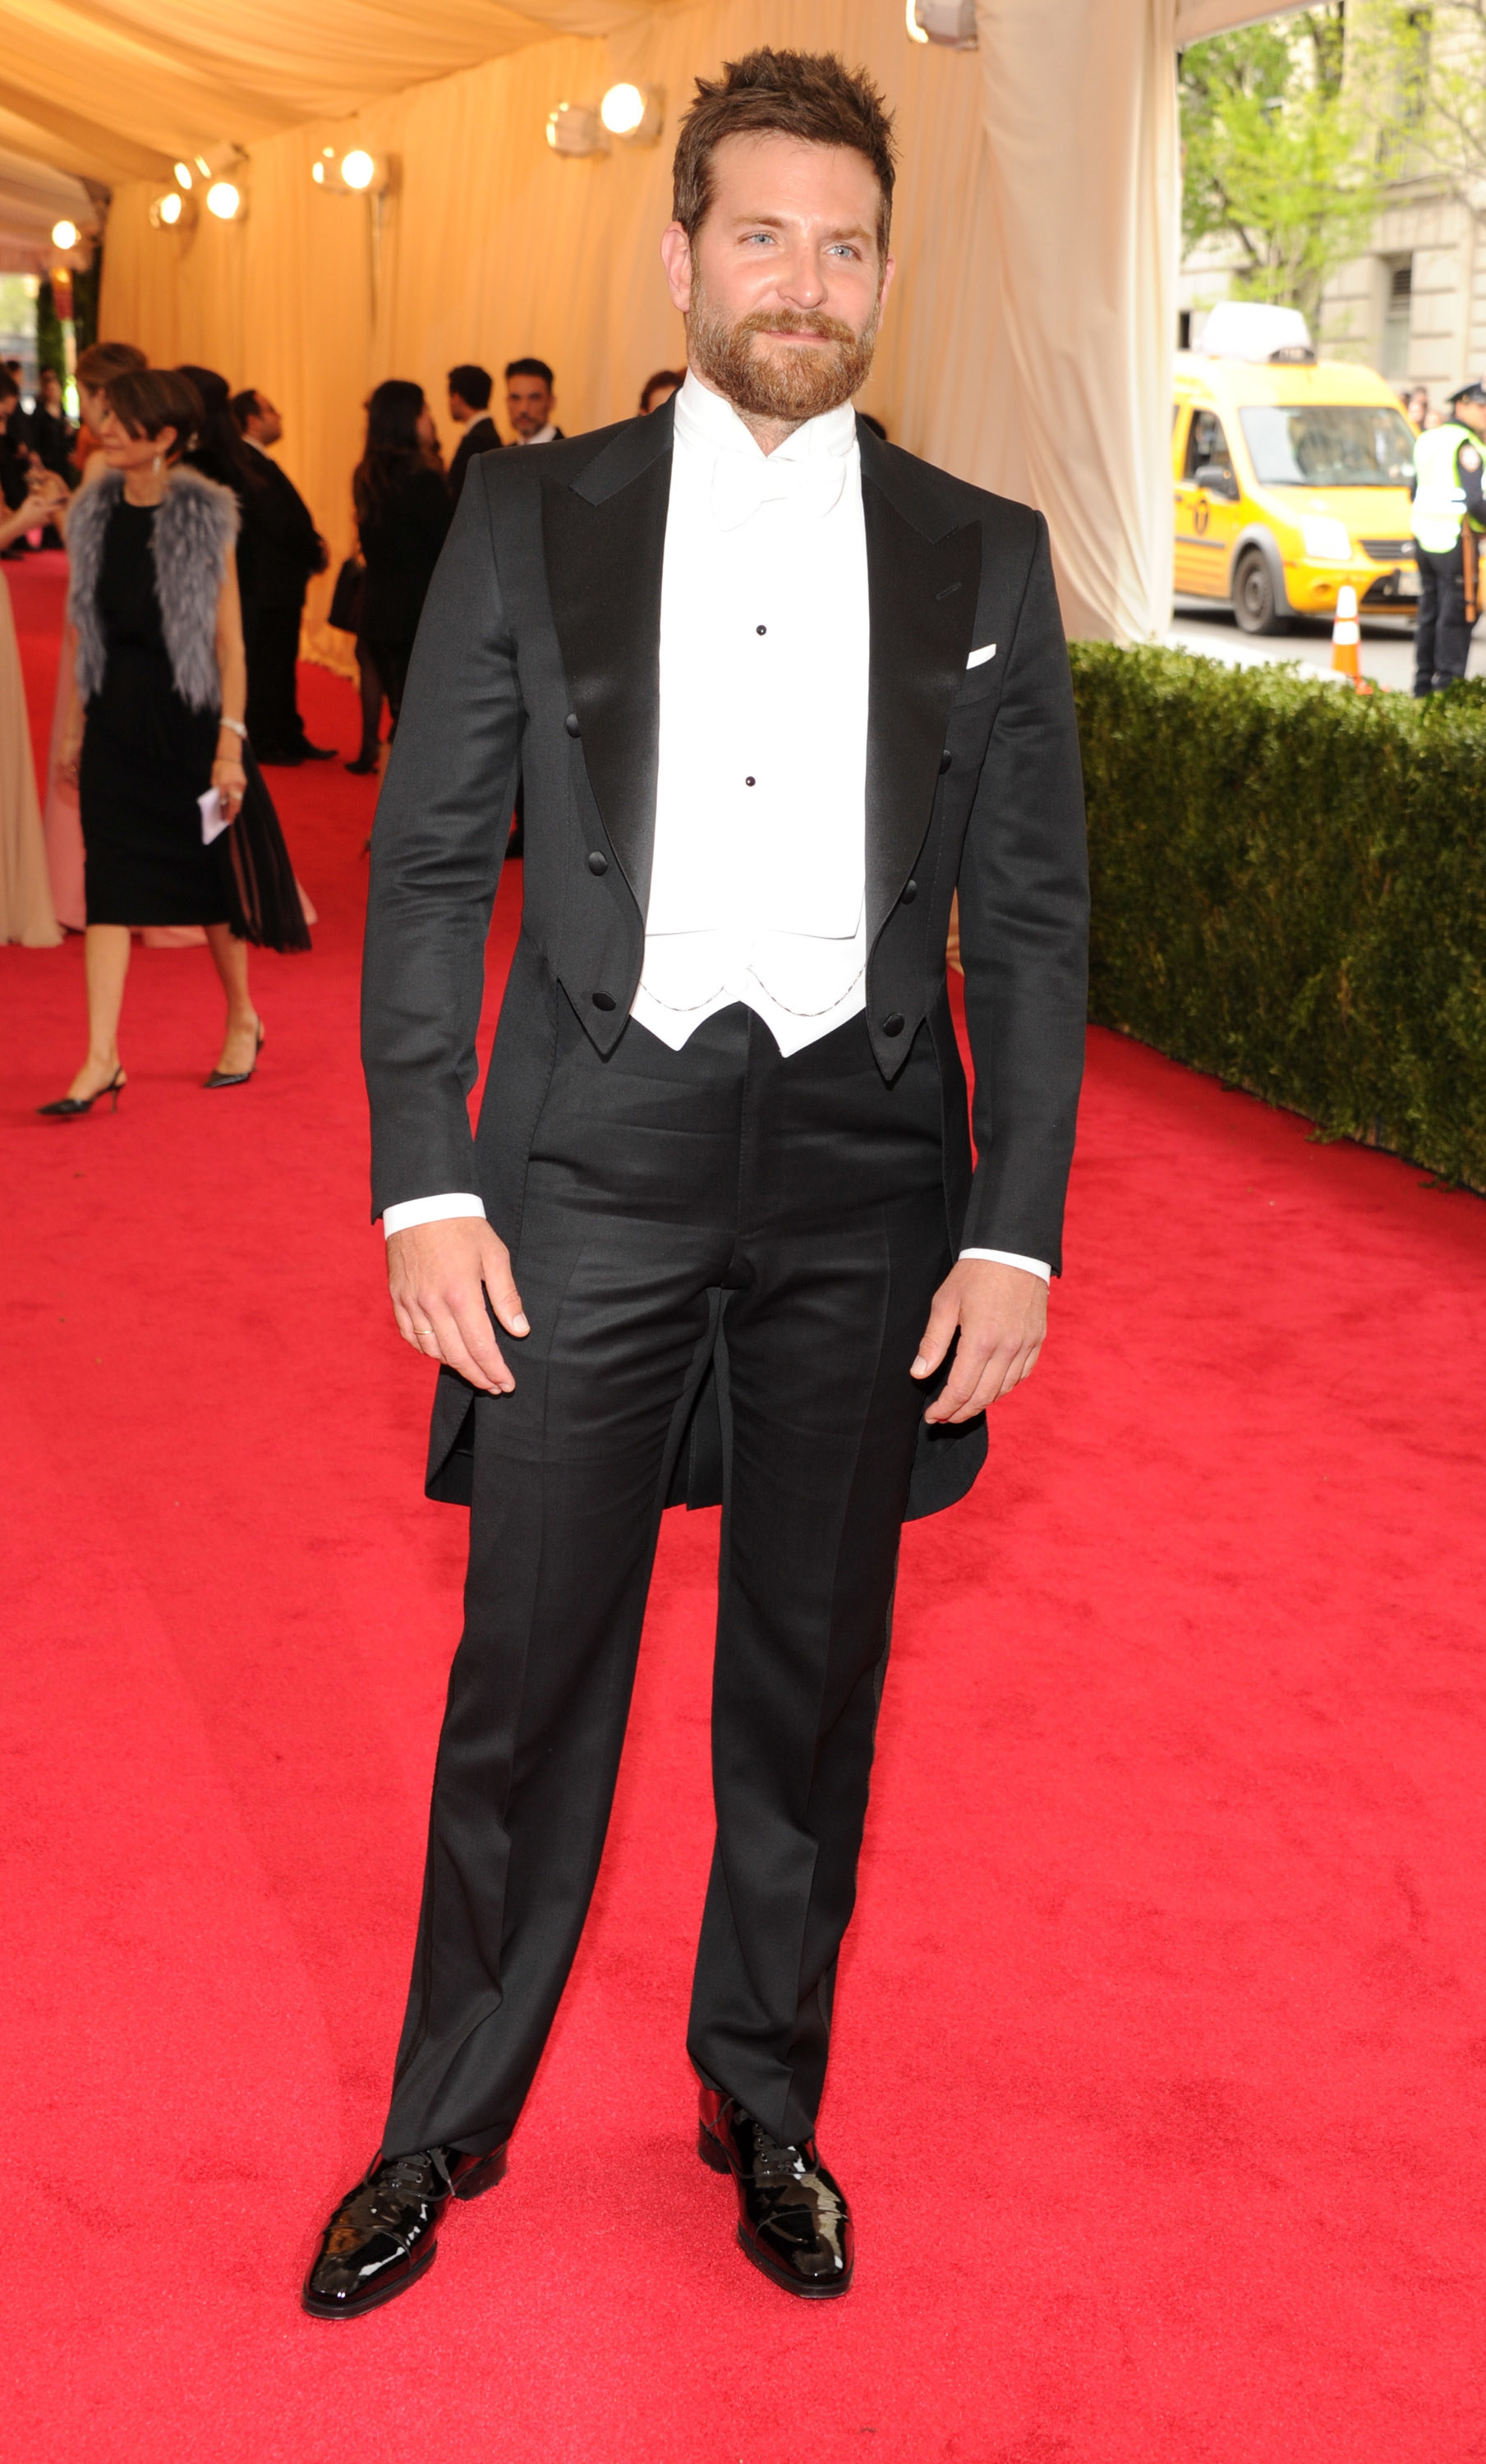 Bradley Cooper in a tailcoat suit